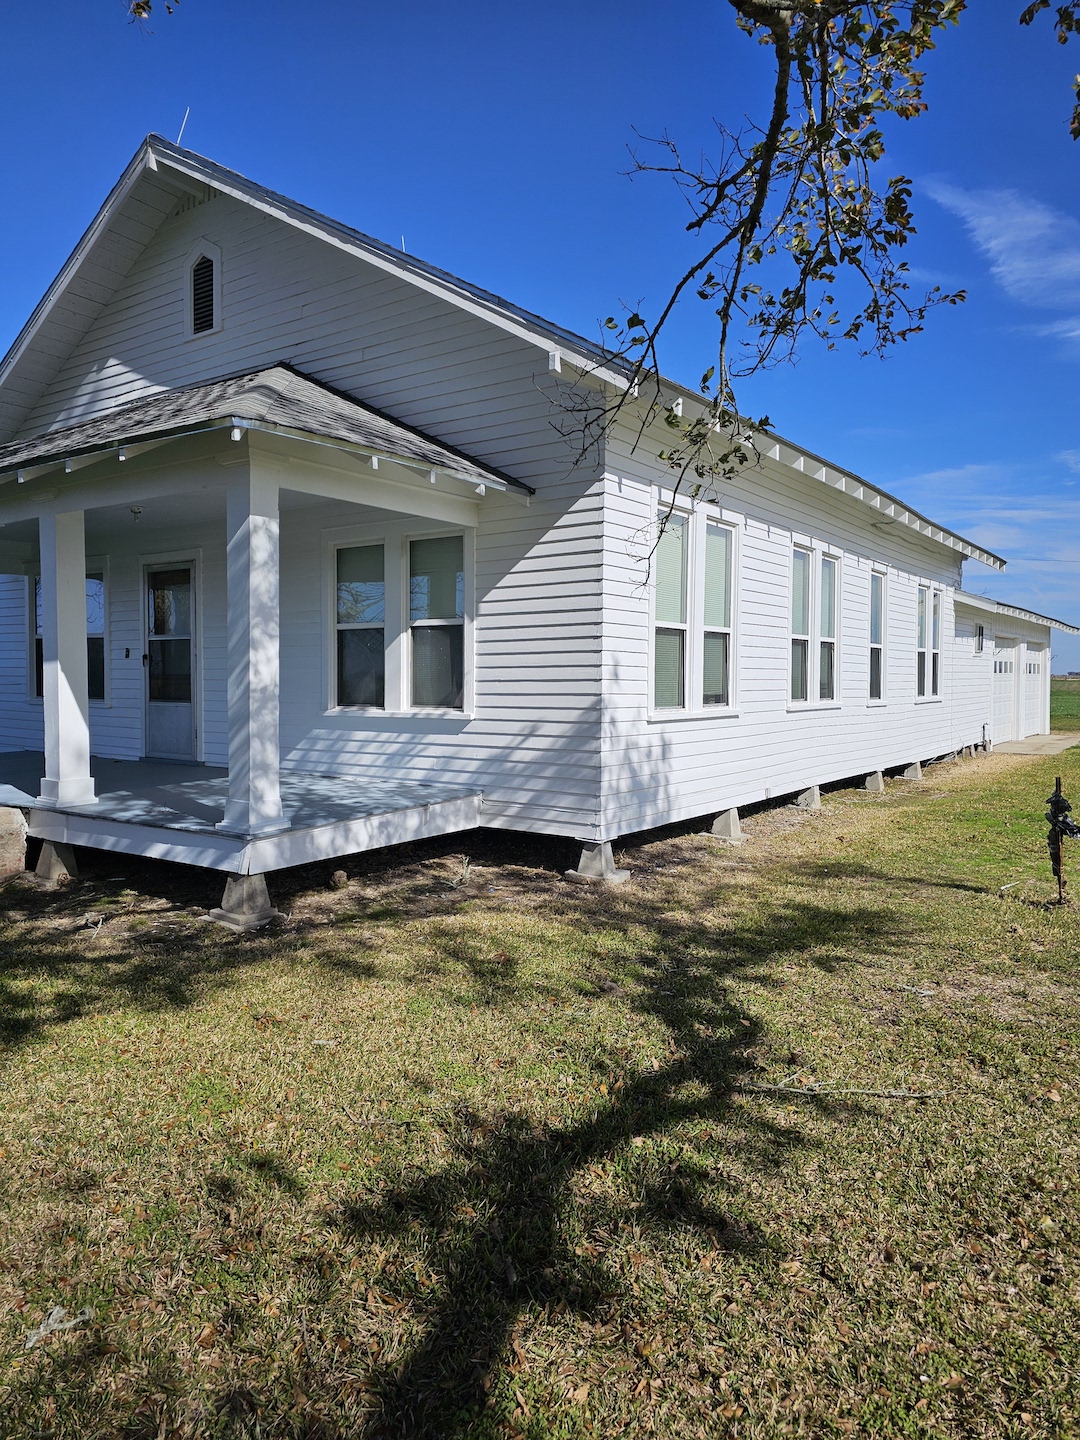 Quality Exterior Painting On An Old Farm House in Welsh, LA Image